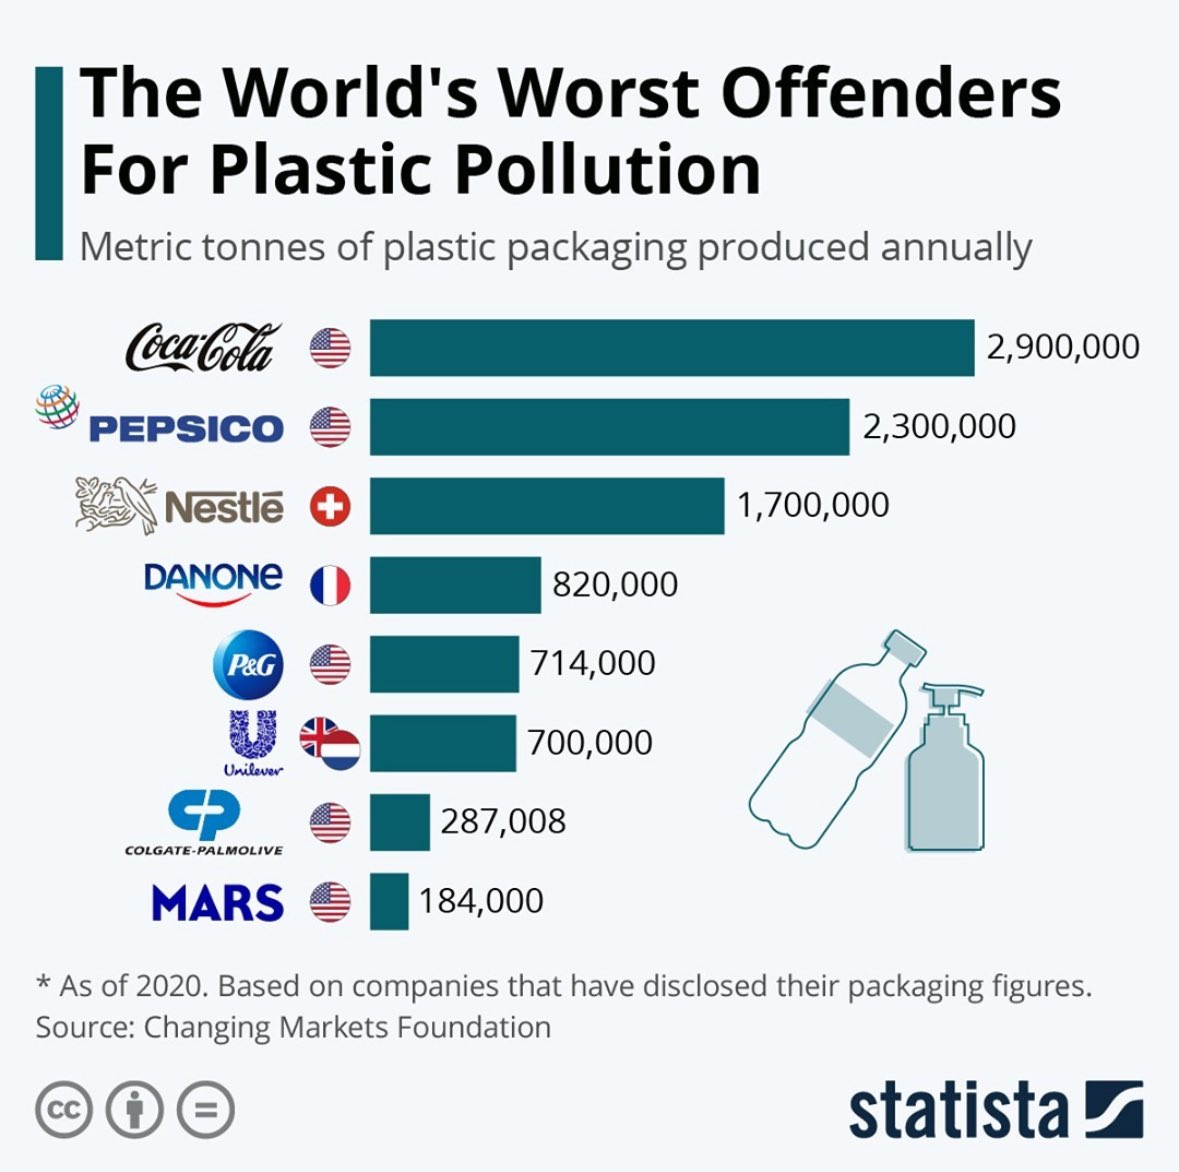 Eight out of eight of the world’s biggest plastic polluters are on the boycott list.

It seems companies with no care or concern for humanity tend to support Israel — shocker!

Boycott Israel and make the world a cleaner place.